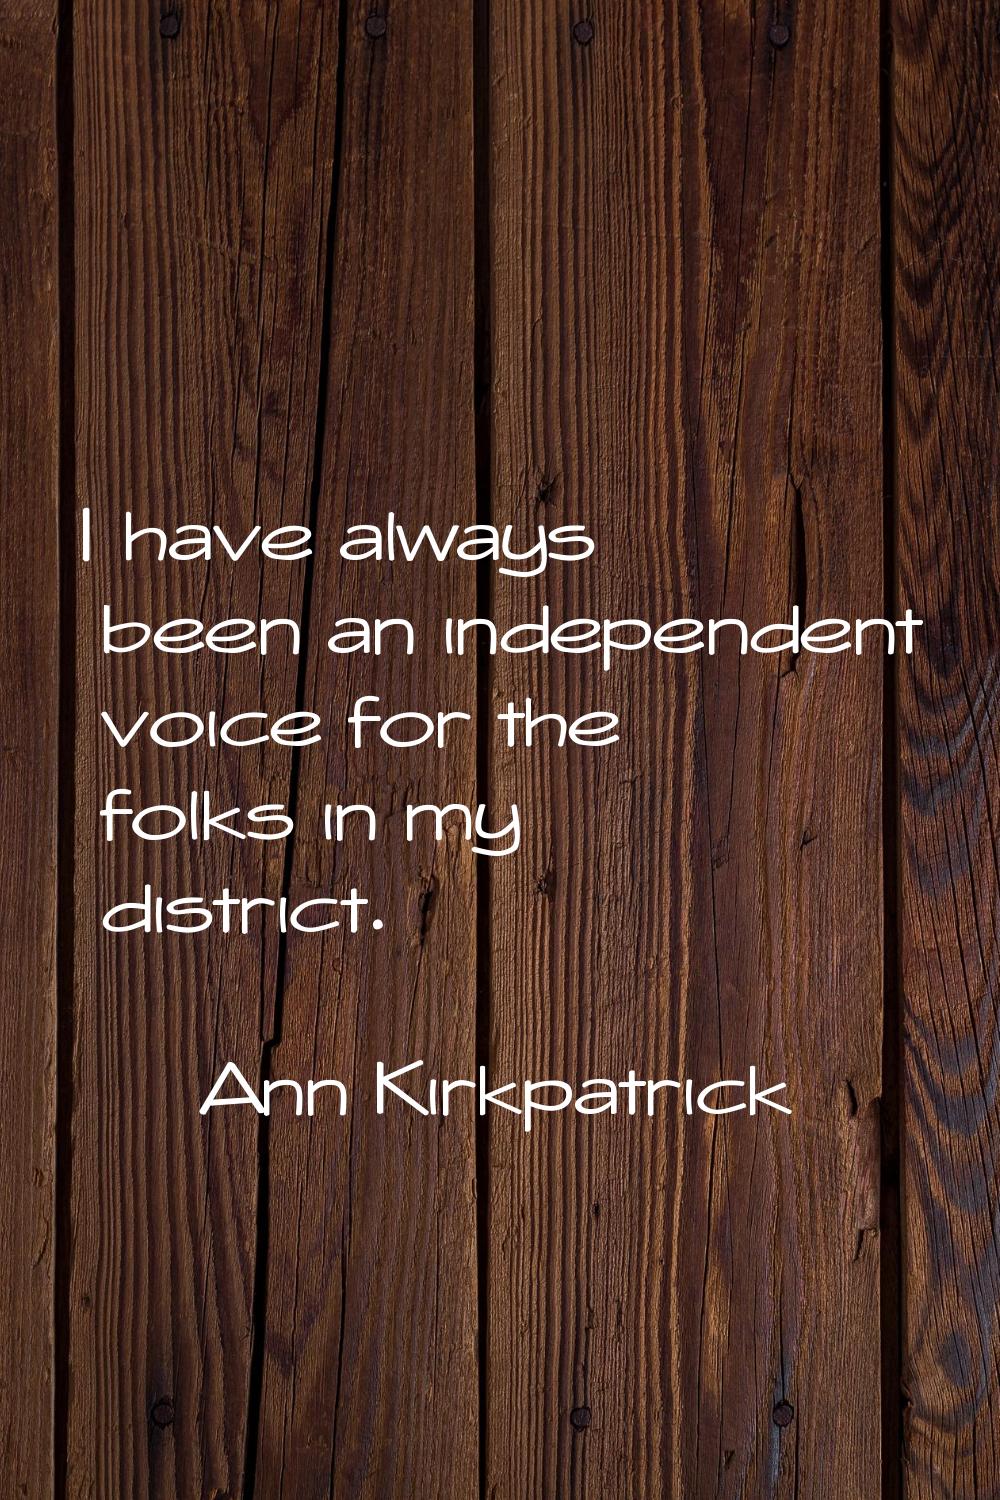 I have always been an independent voice for the folks in my district.